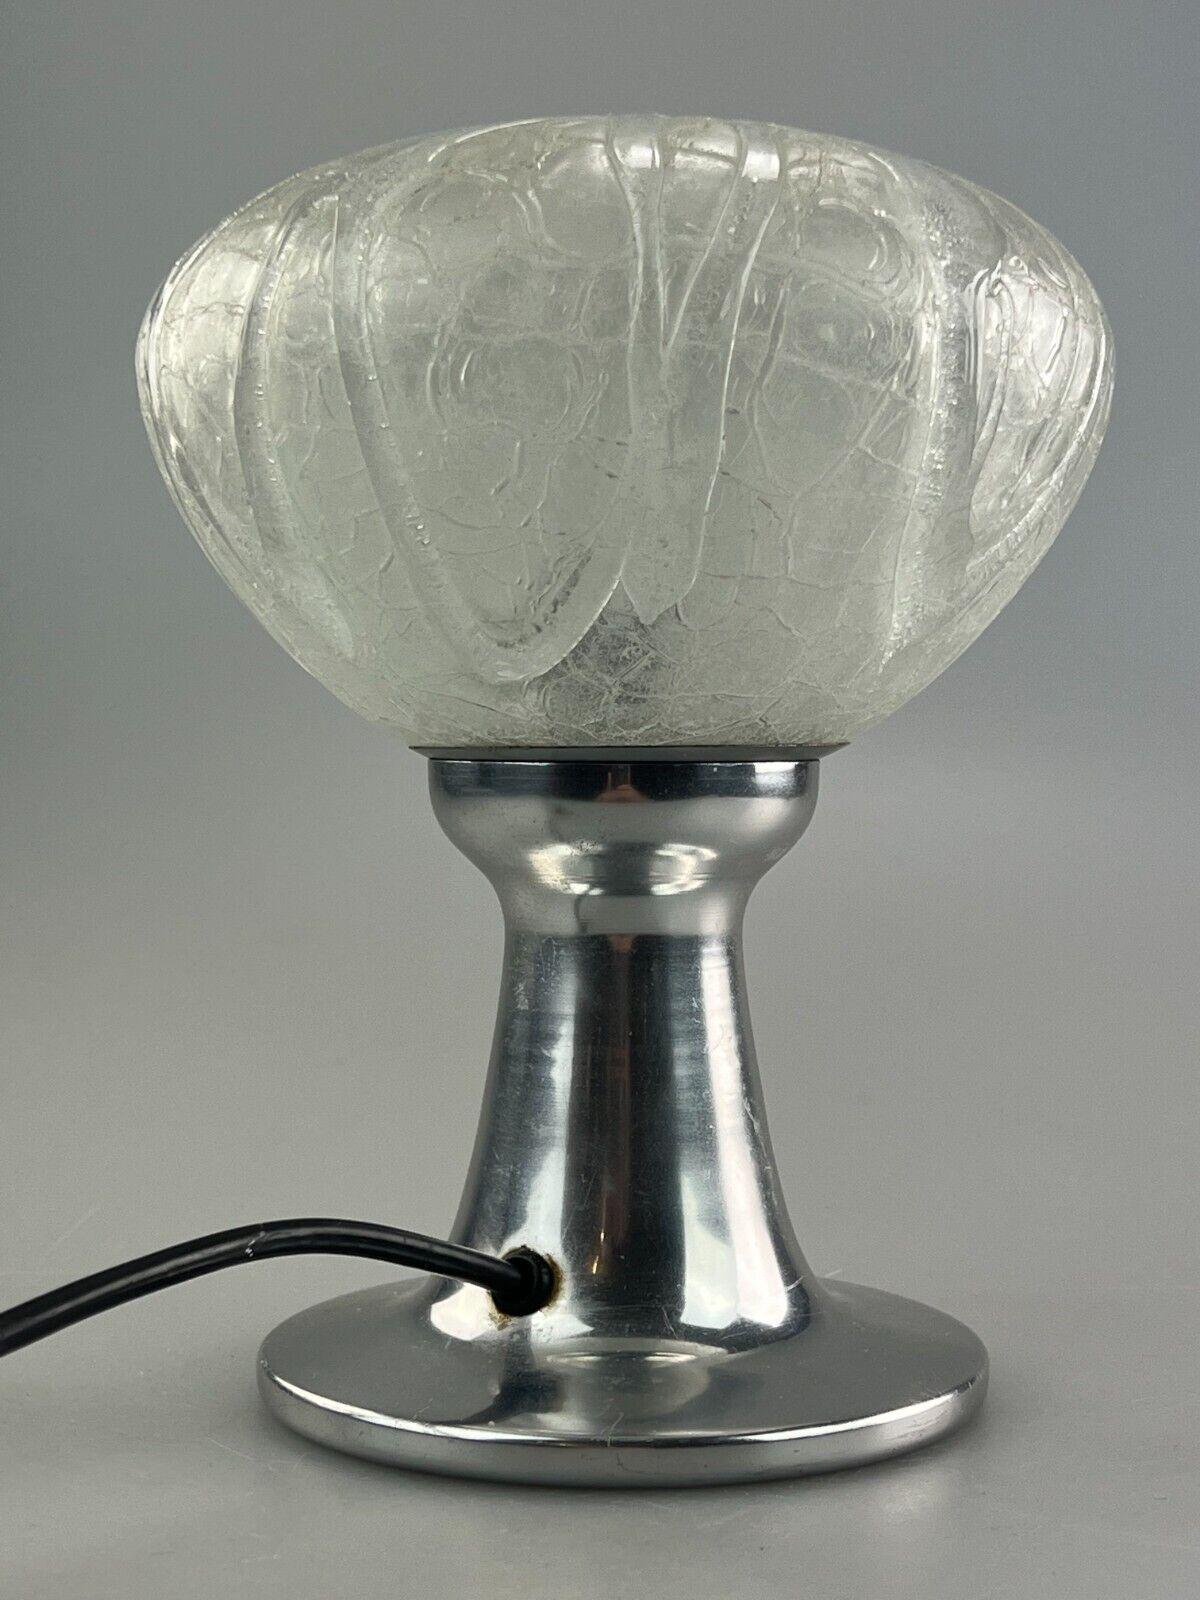 60s 70s Table Lamp Bedside Lamp Chrome Doria Glass Space Age Design For Sale 1